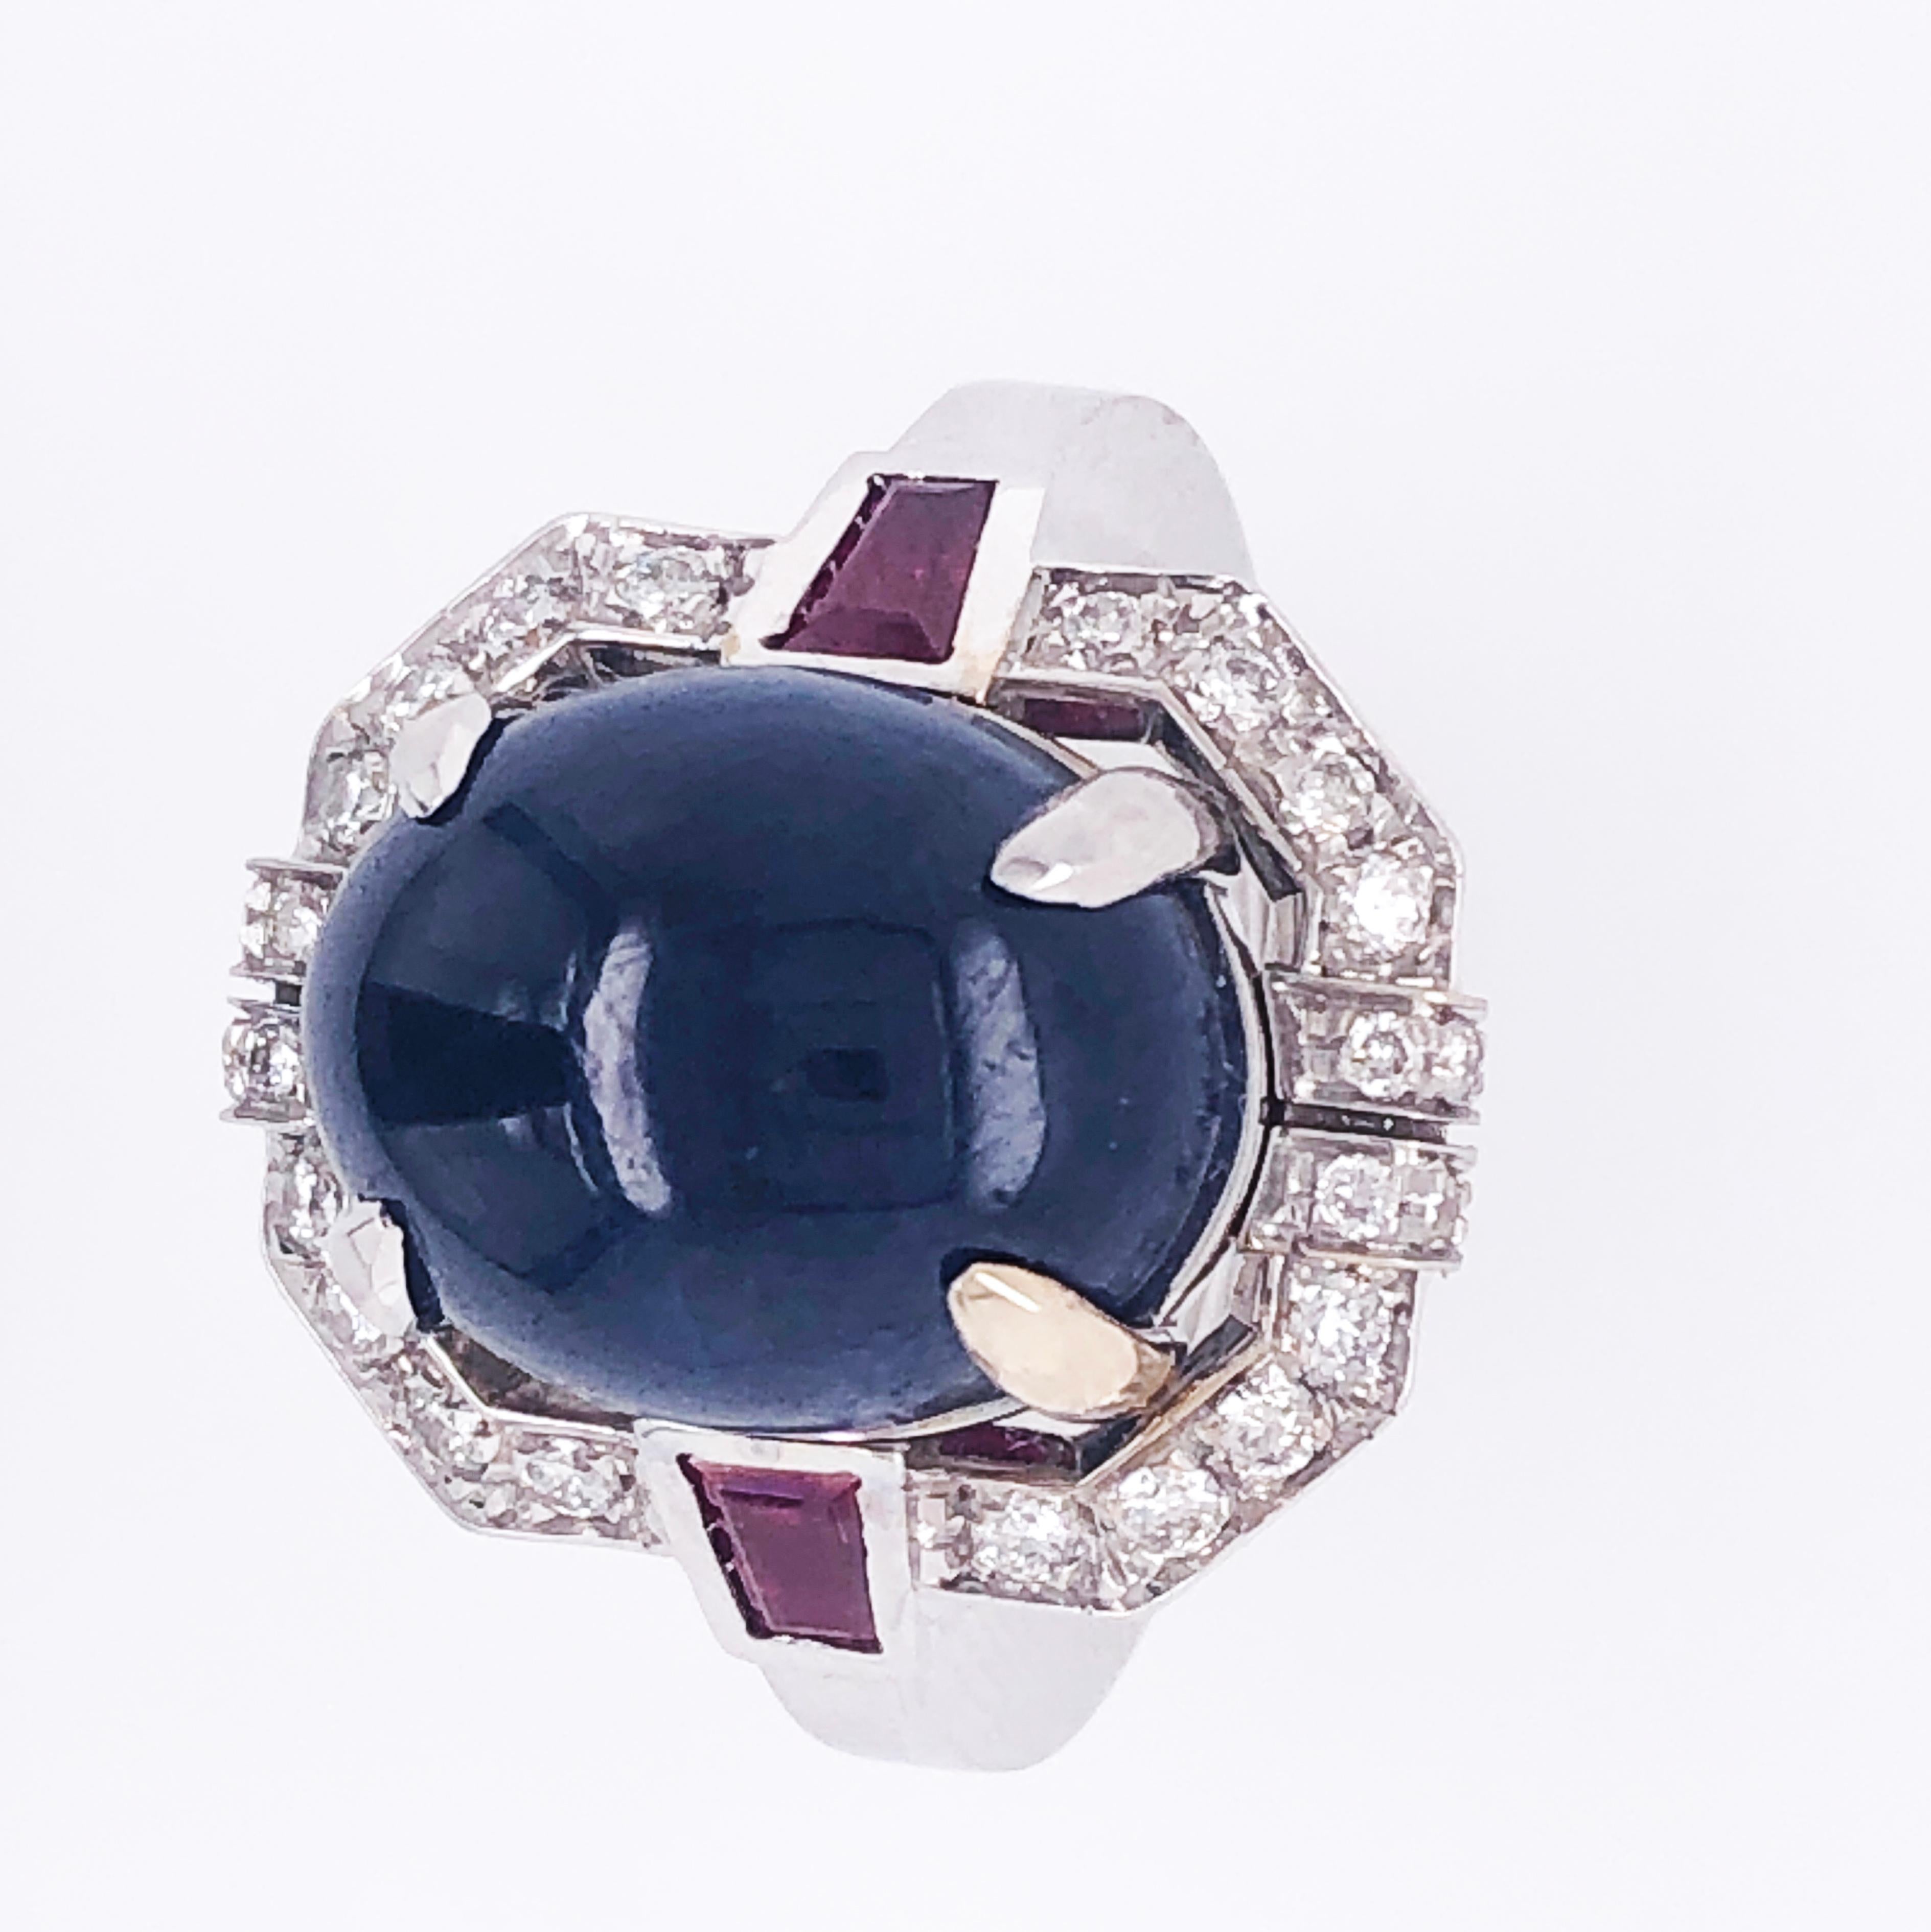 Berca 13.48Kt Oval Sapphire Cabochon 0.42Kt Diamond 0.66Kt Ruby Cocktail Ring 5